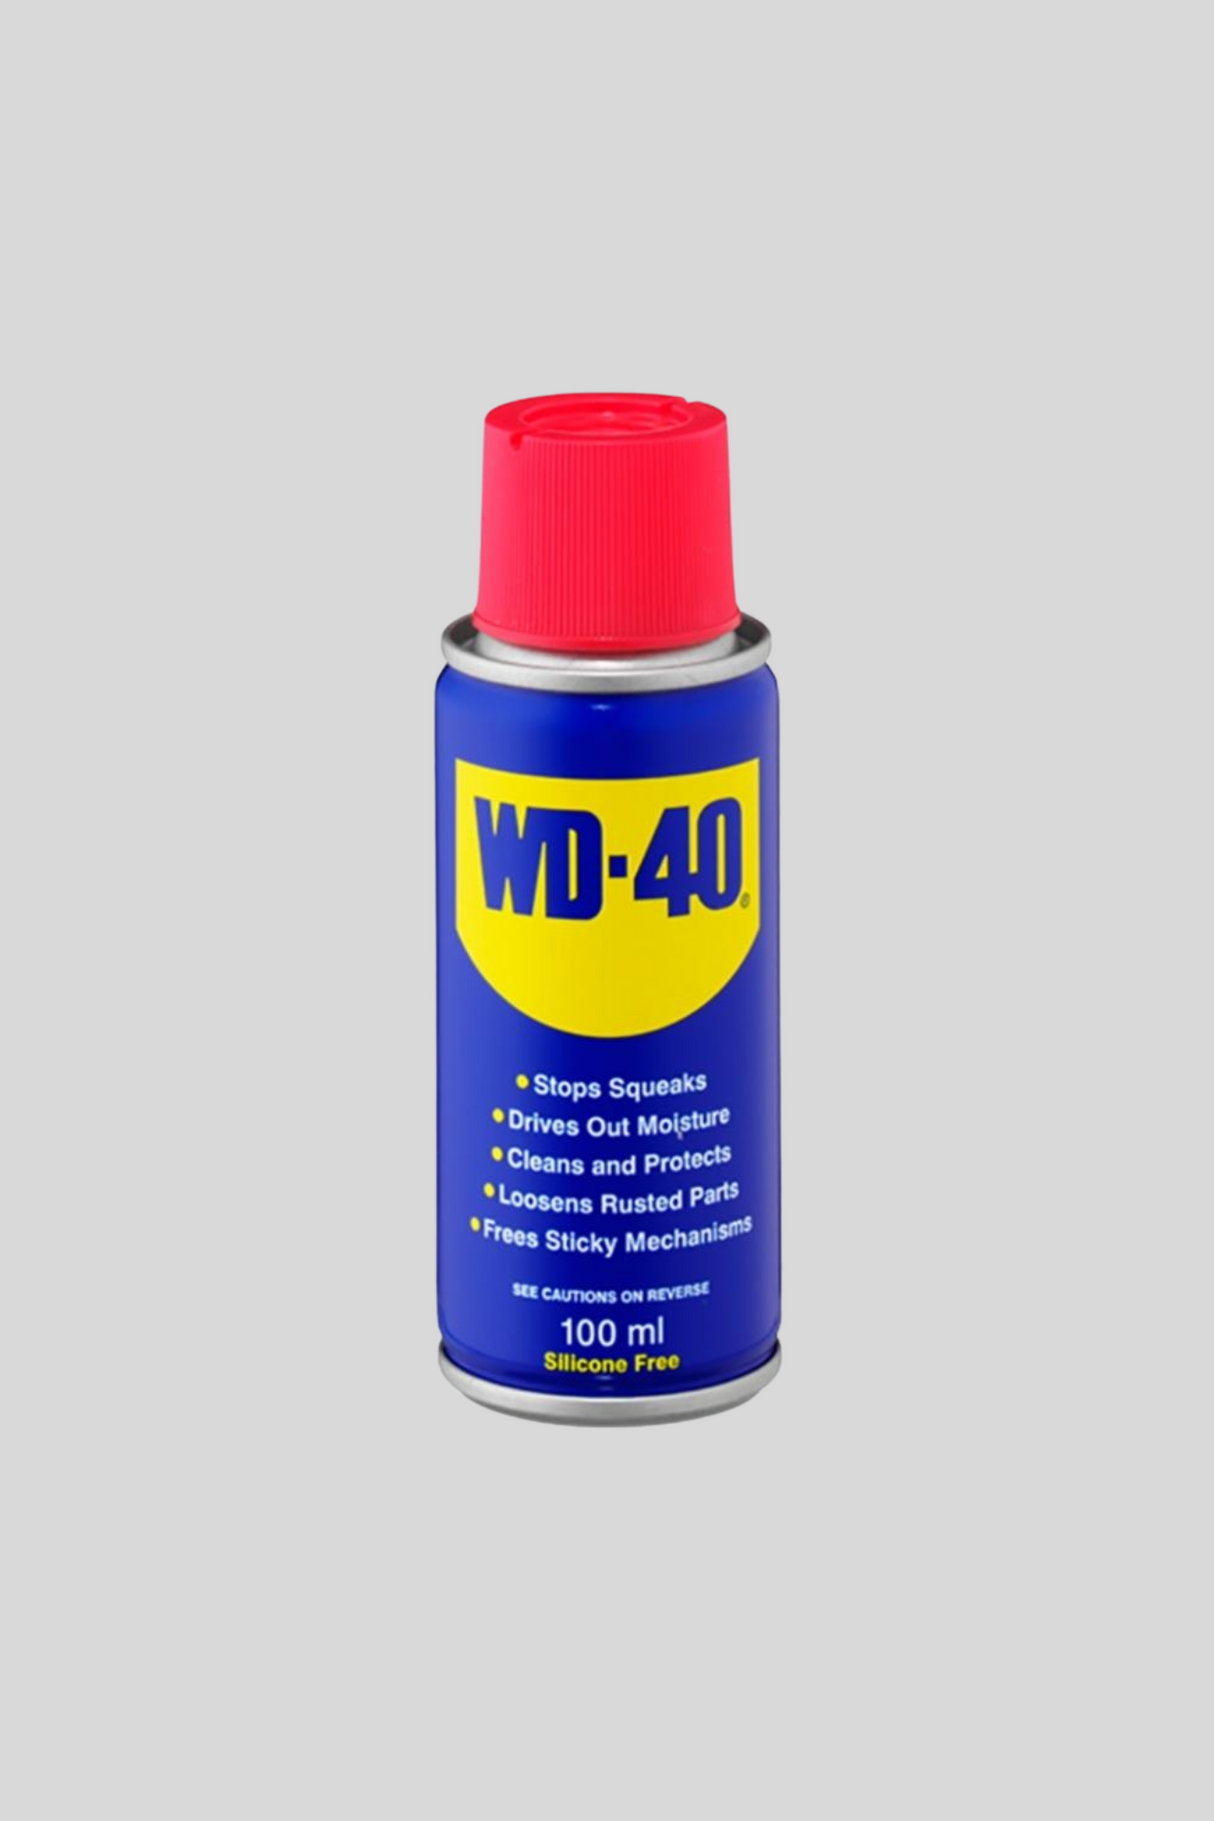 wd-40 cleaner 100ml